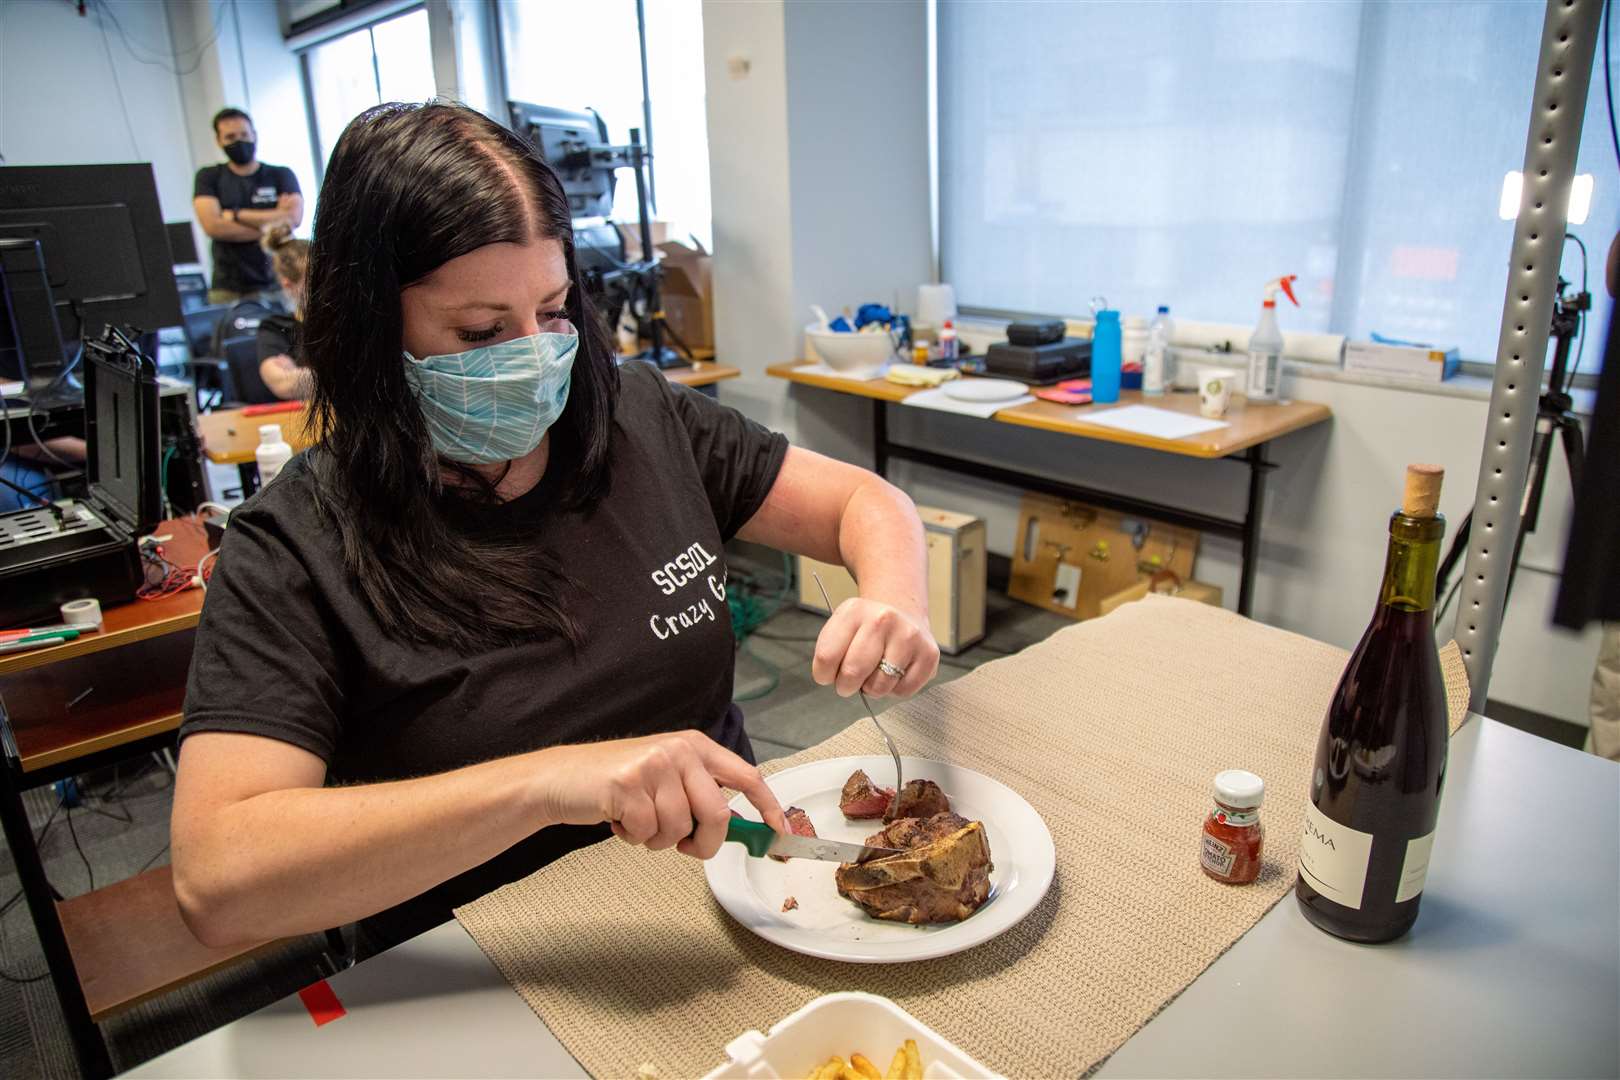 Heather Rendulic, who lost movement in her left arm after a stroke, was able to use a fork and knife to cut a piece of steak after spinal cord stimulation (Tim Betler/UPMC and University of Pittsburgh Schools of the Health Sciences)